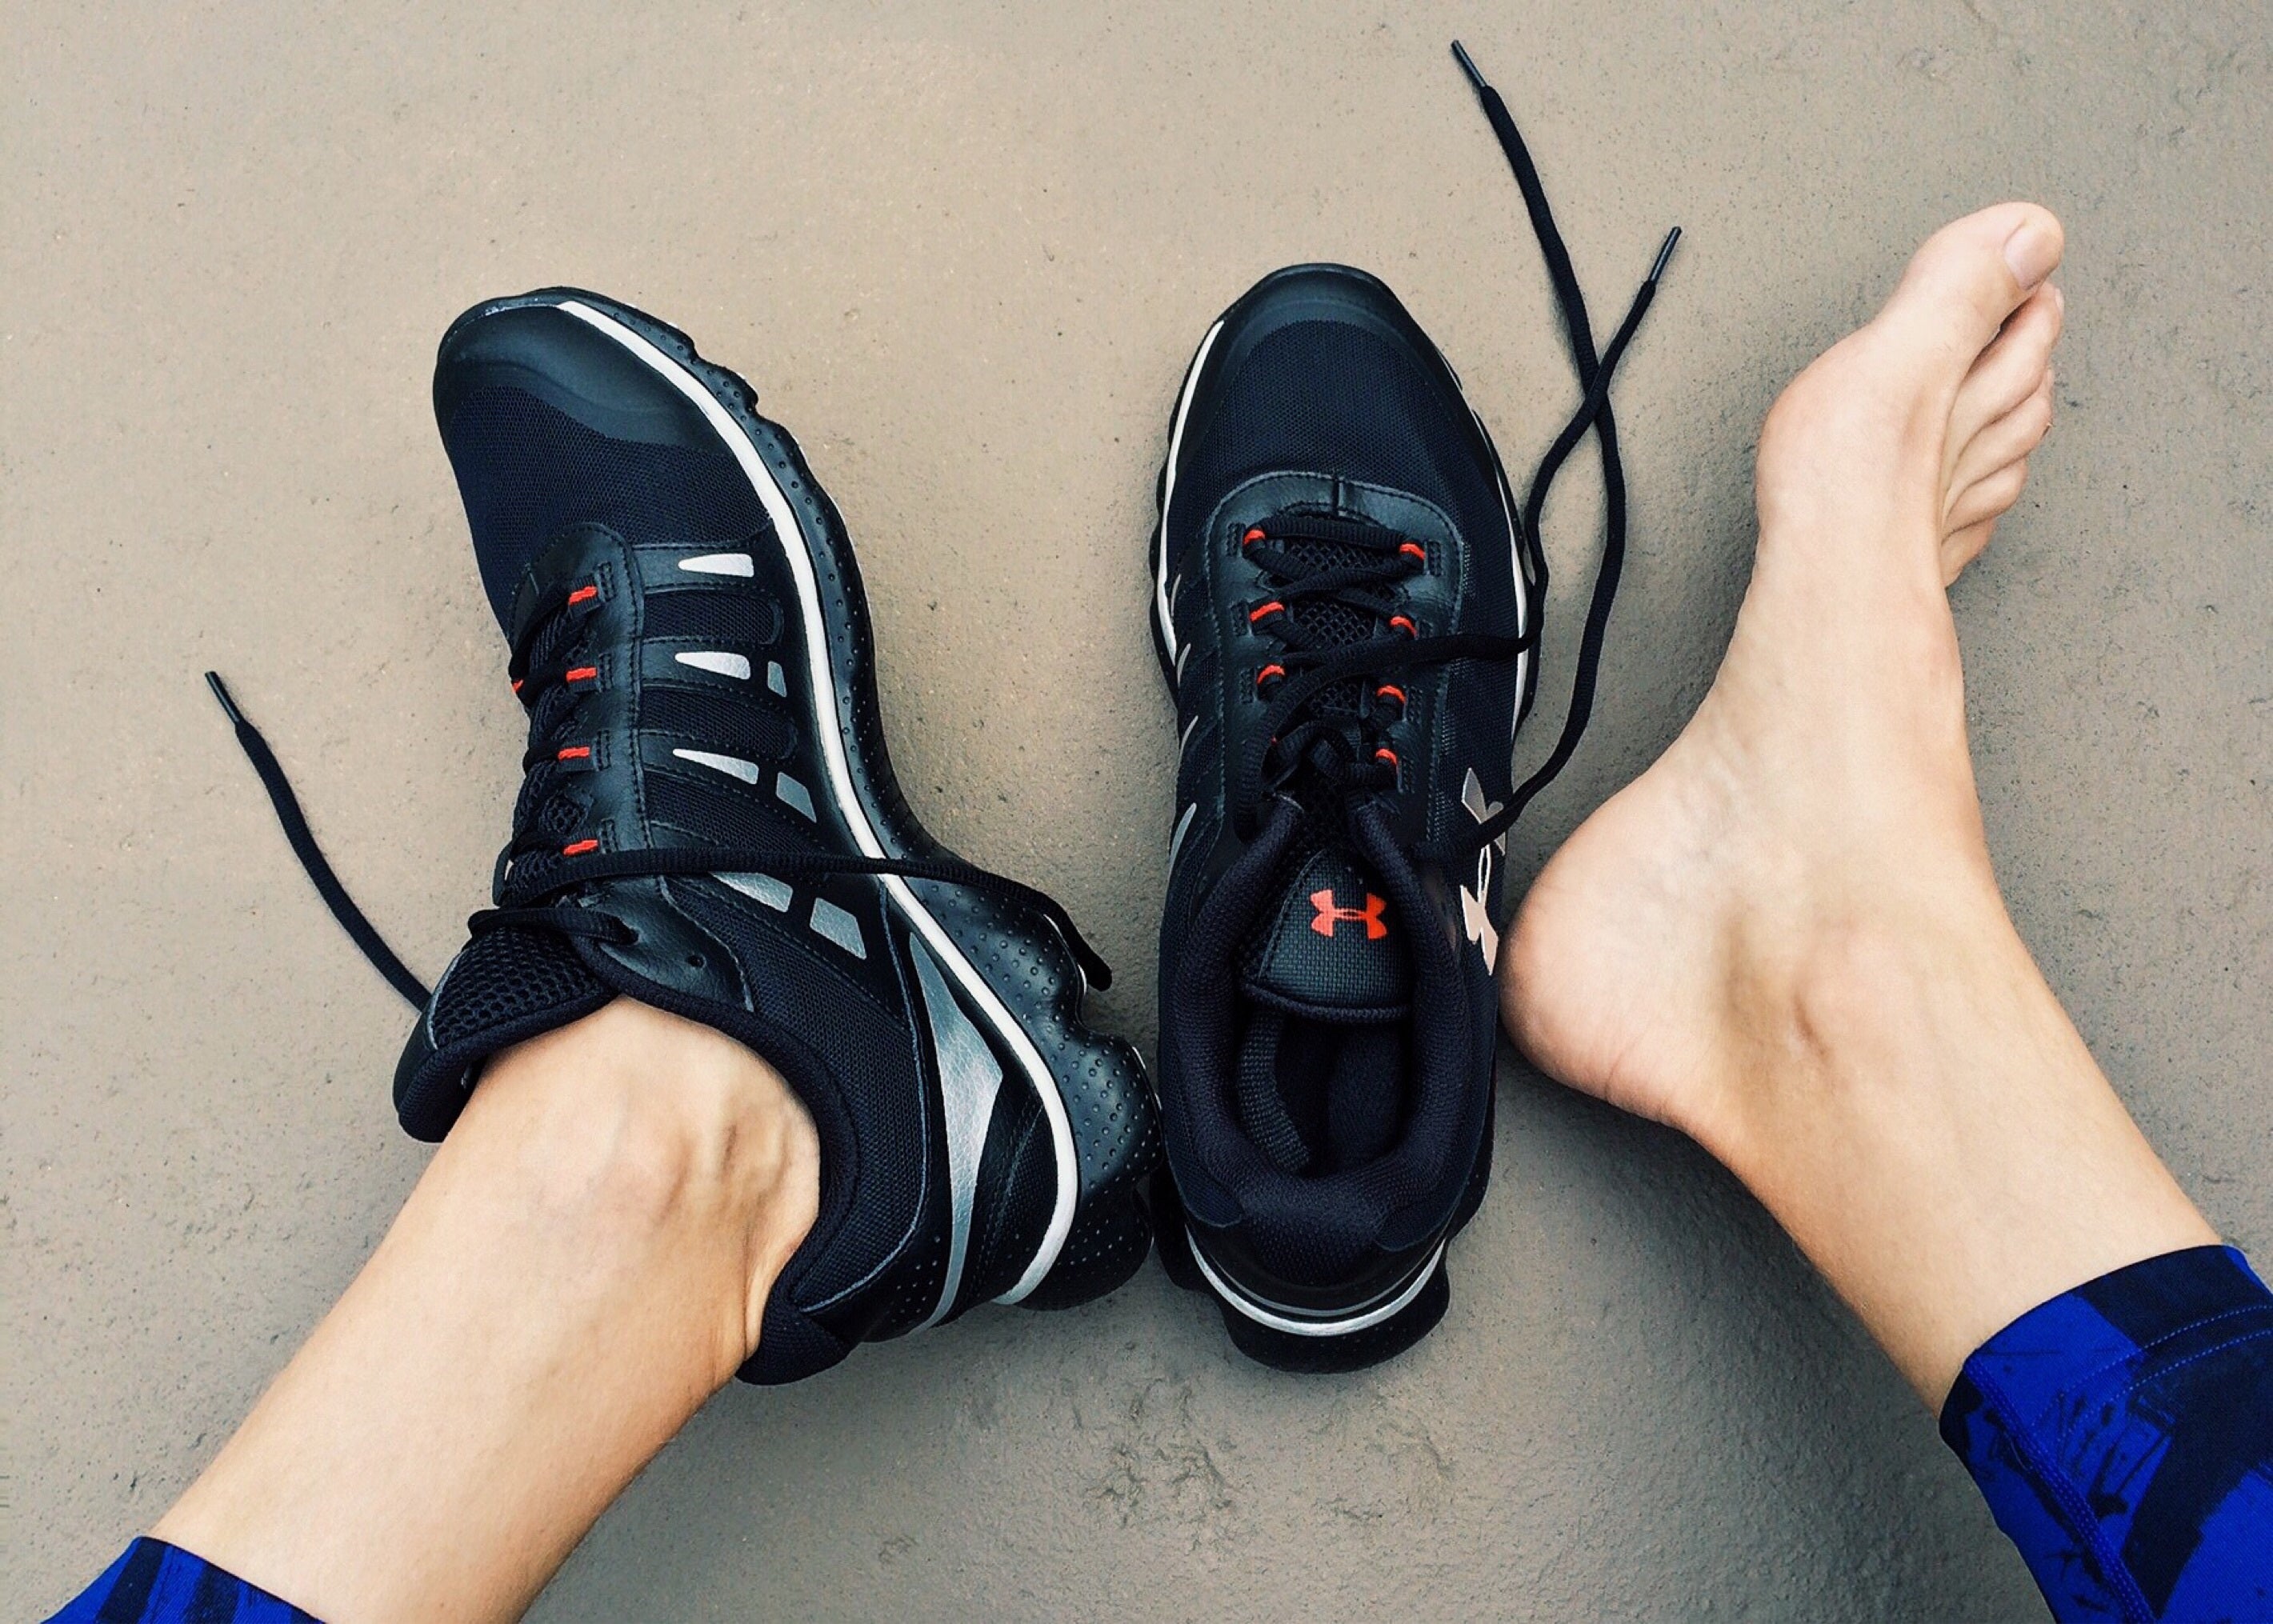 How to Prevent Blisters While Running